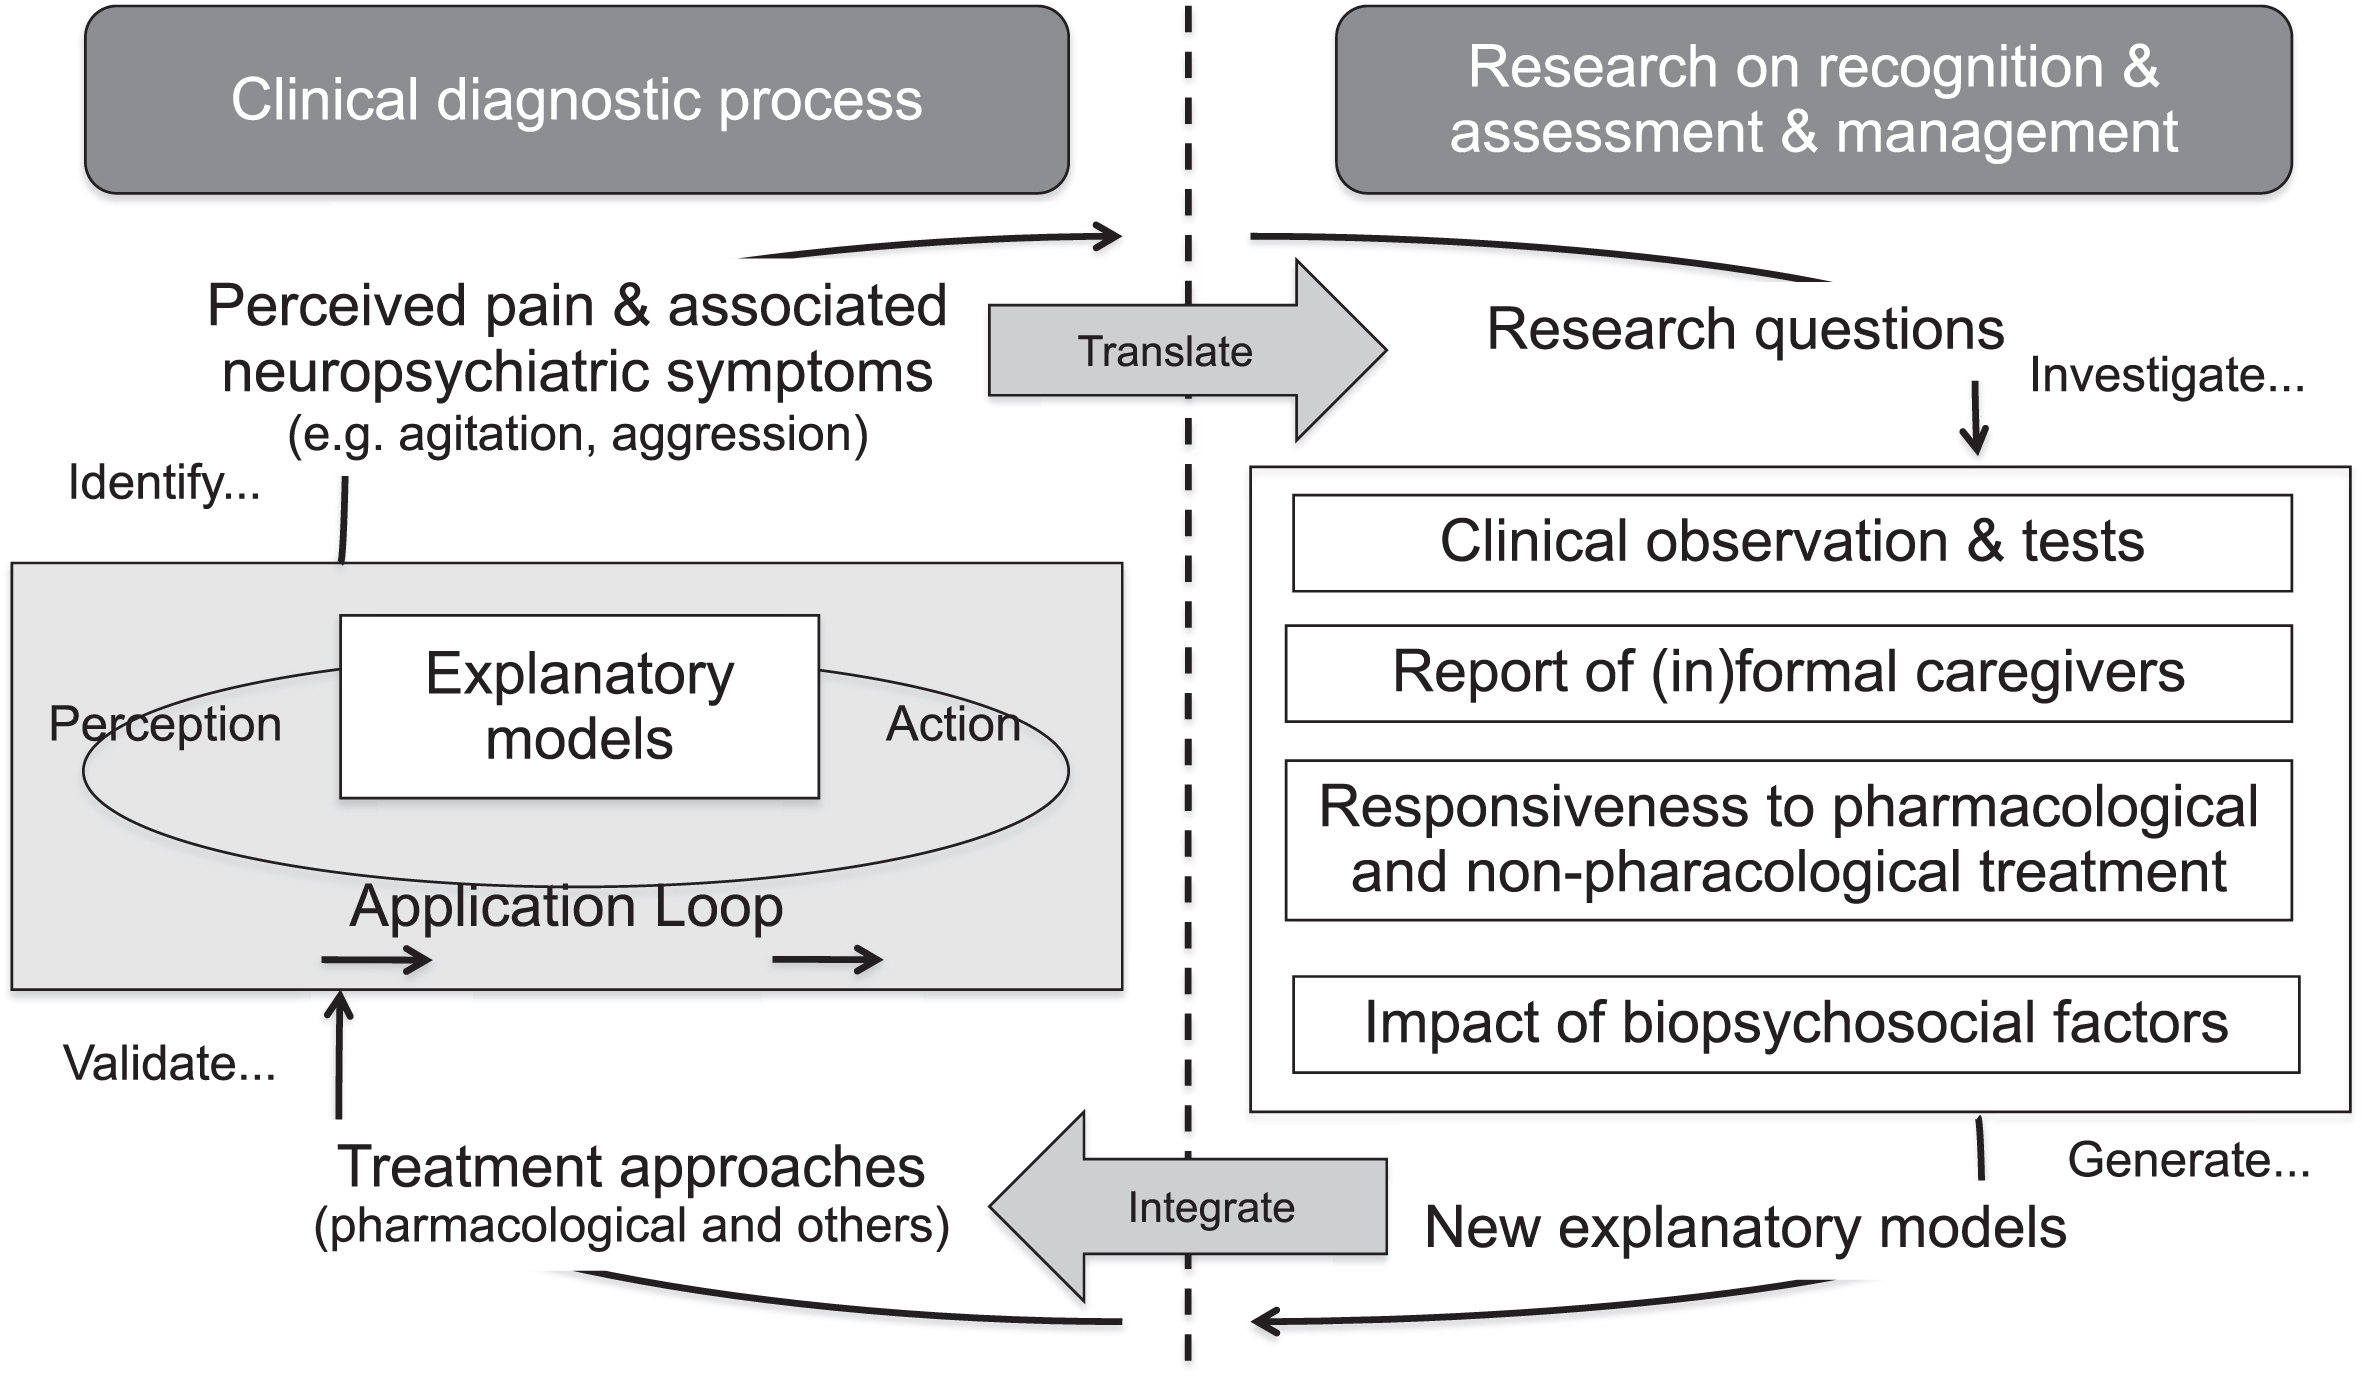 Conceptual framework for an adaptation loop targeted at ameliorating the clinical process of recognizing, assessing, and managing pain and associated neuropsychiatric symptoms in non-communicating patients with advanced dementia. In our case, relevant research questions that need to be evaluated empirically are, among others, which pain assessment tools are reliable in dementia, which treatment approaches are effective in terms of pain management, and which are likely to also alleviate pain-related neuropsychiatric symptoms, which factors are apt to impact upon pain perception and responsiveness to treatment, etc.